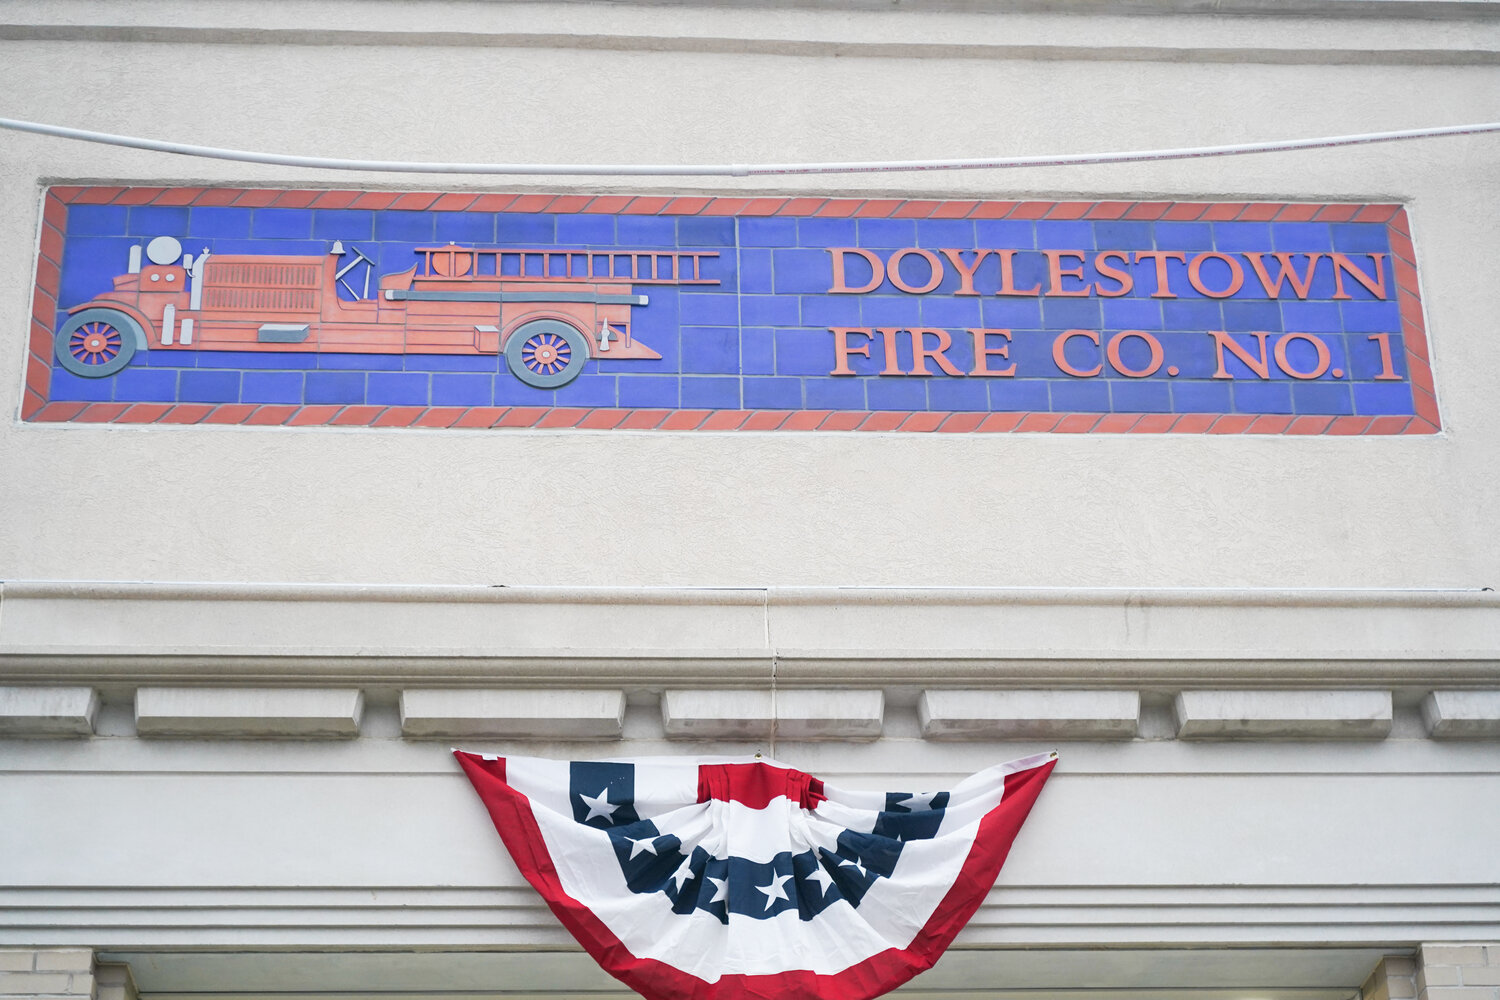 A new mural depicting the Ahrens-Fox pumper was unveiled at the Doylestown Fire Company #1 on June 7 in commemoration of the 100th anniversary of the company’s acquisition of the truck.